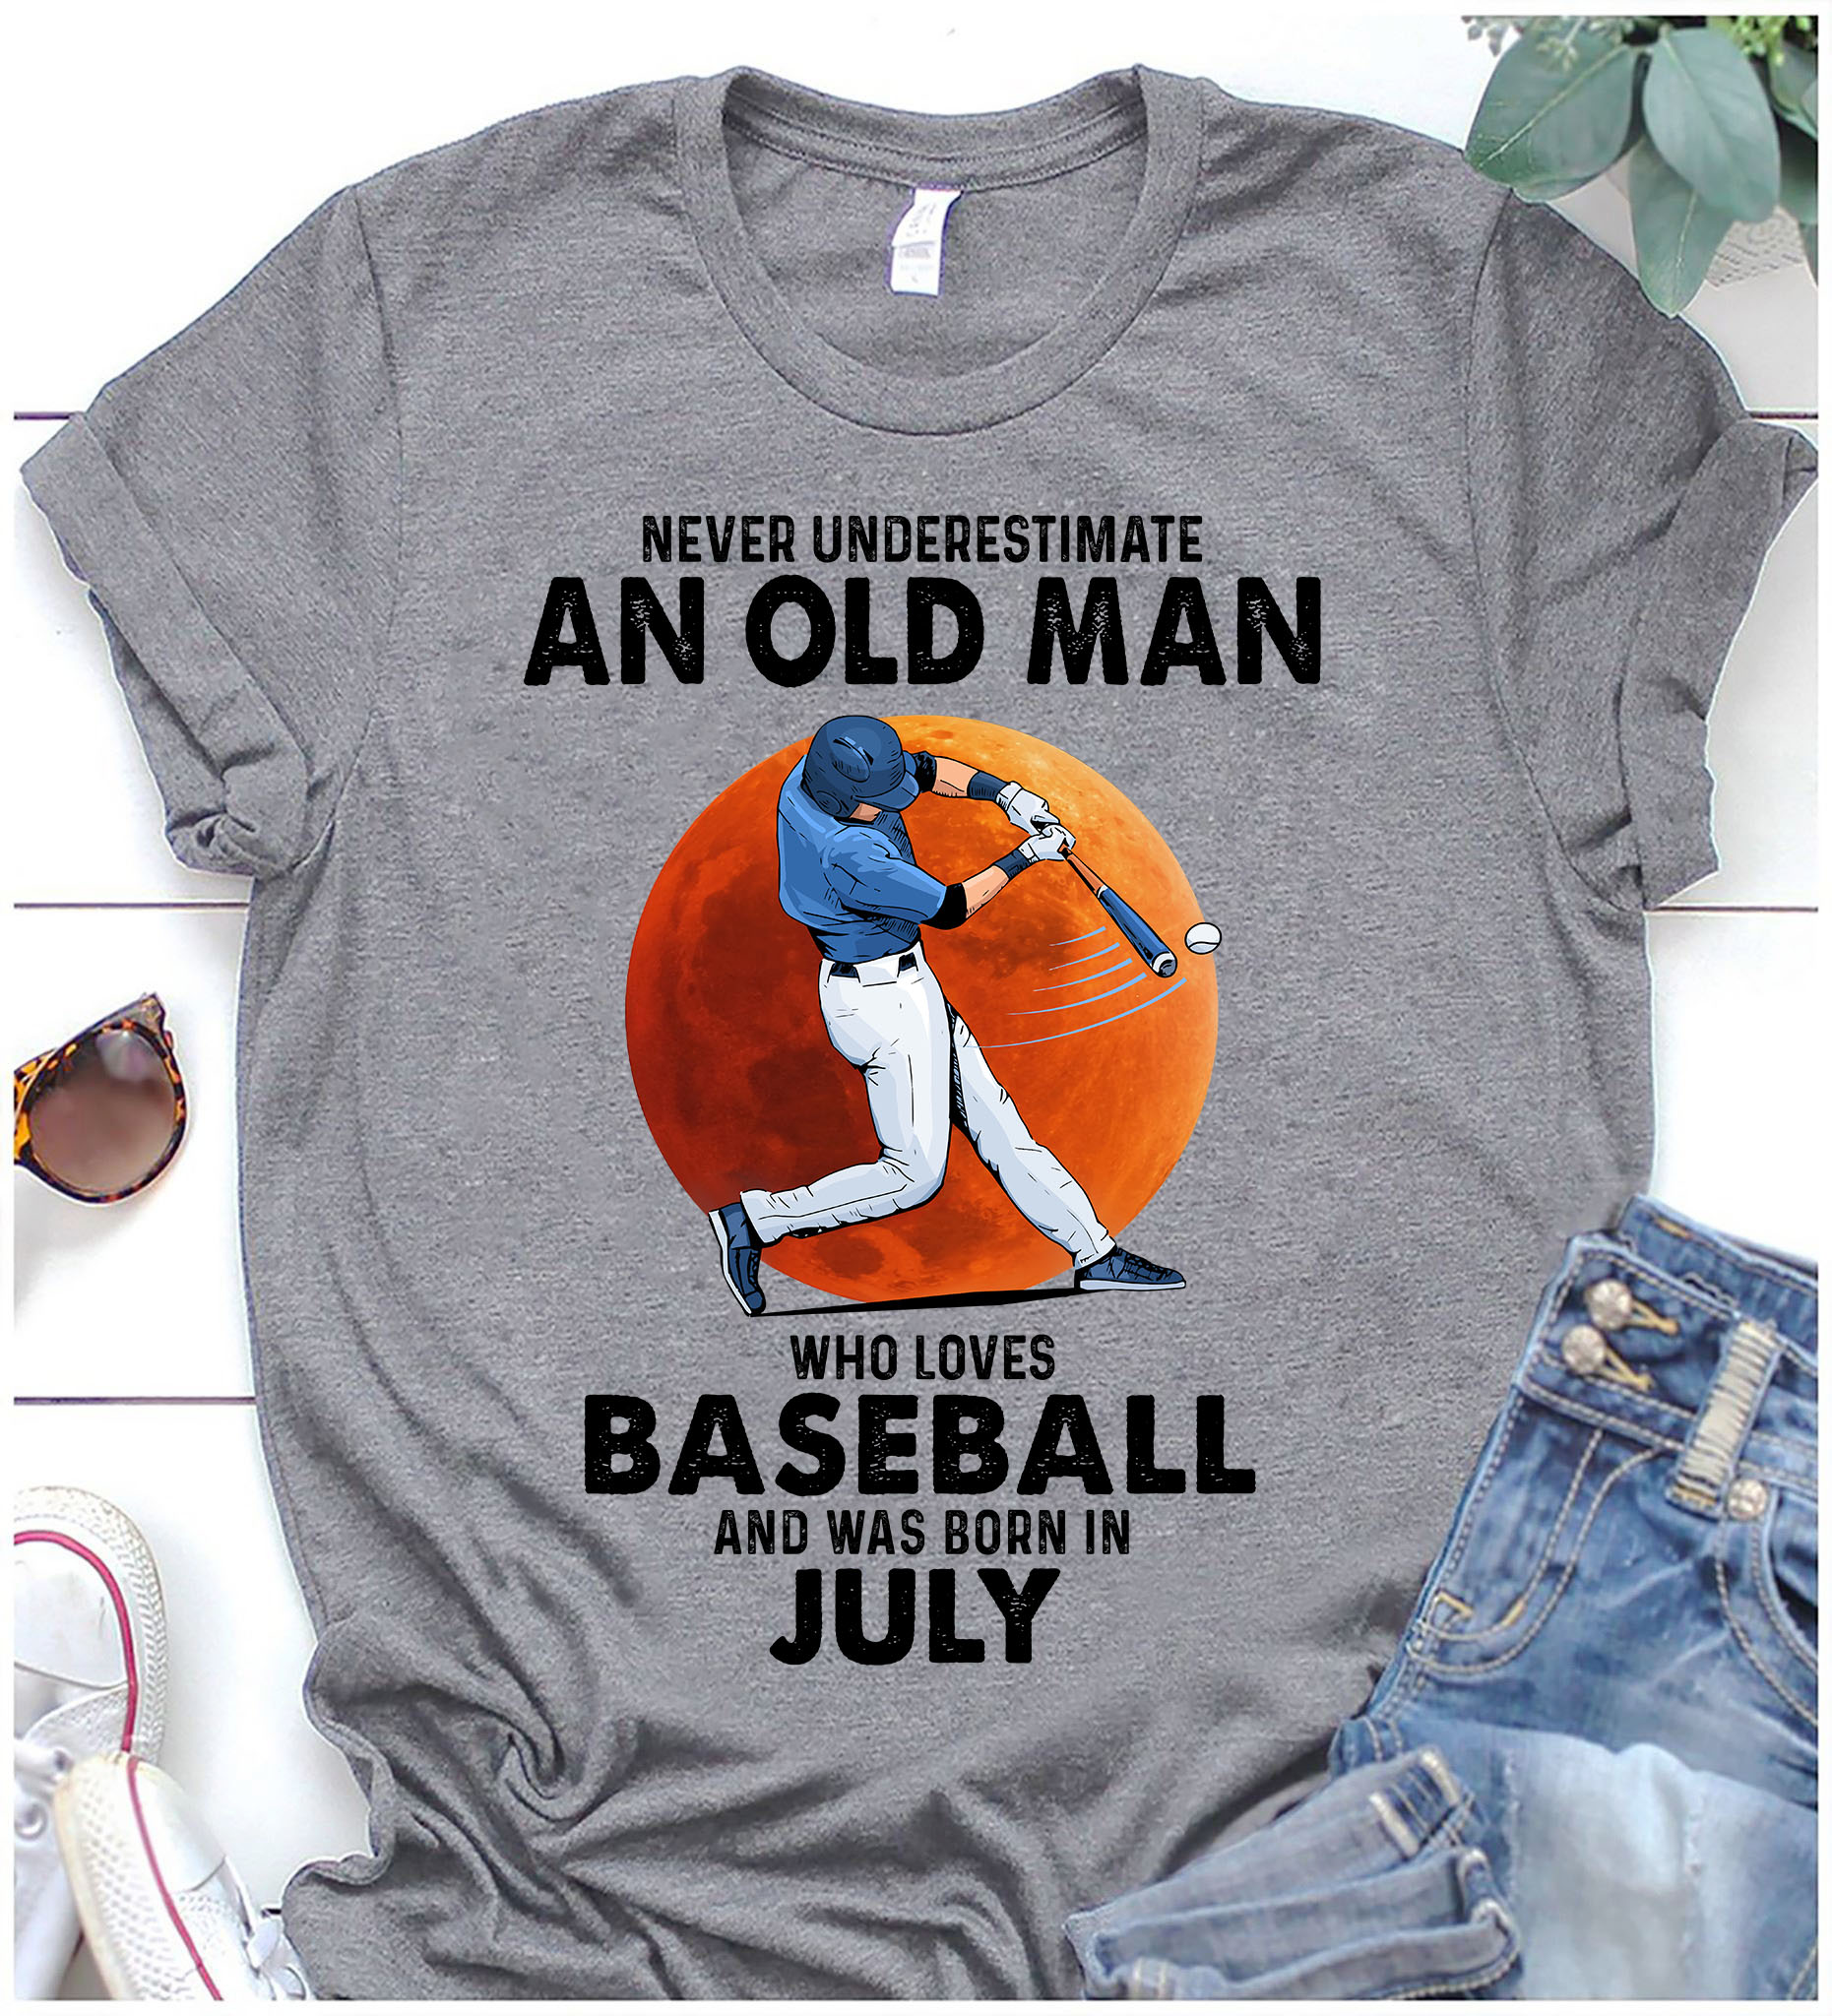 Never underestimate an old man who loves baseball and was born in July